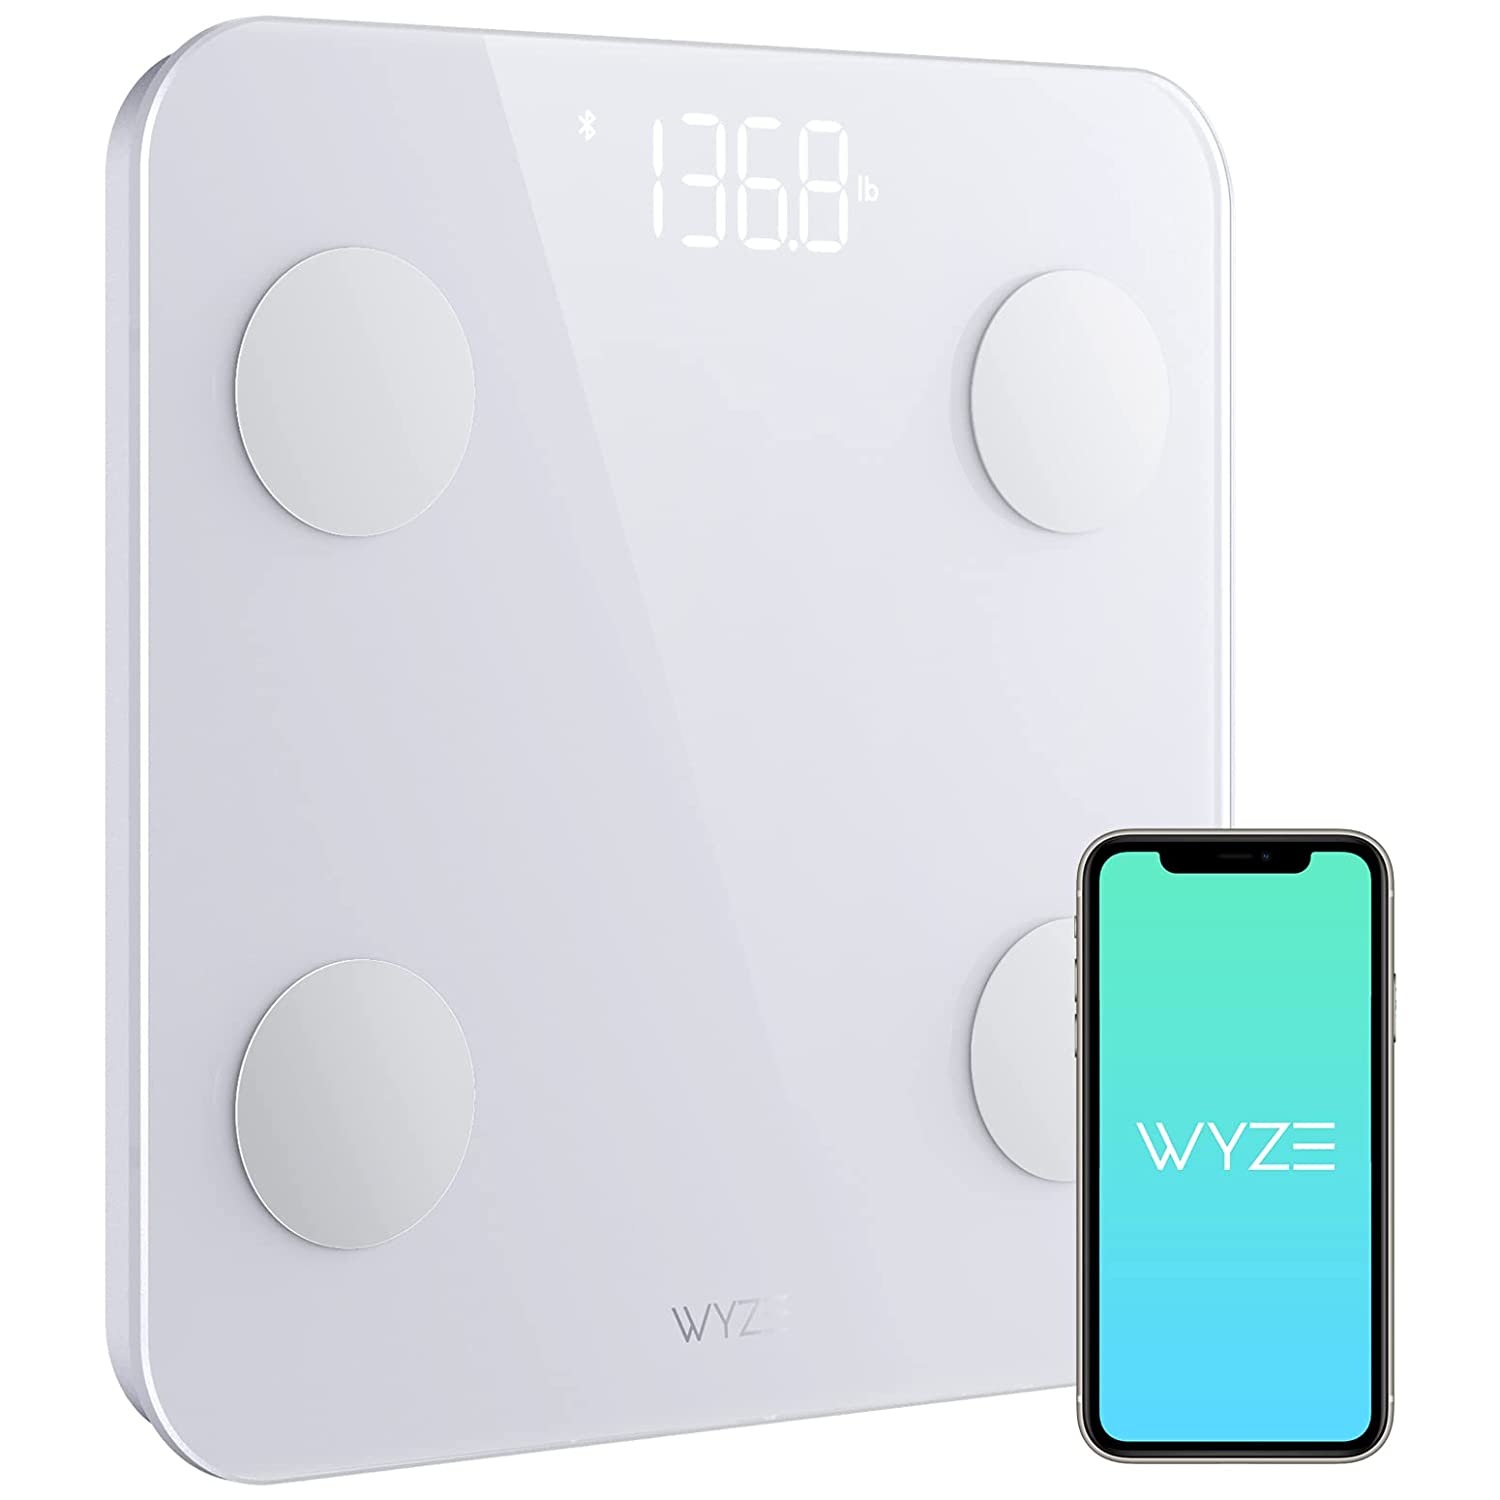 Smart scale by WYZE tracks your weight and body fat 